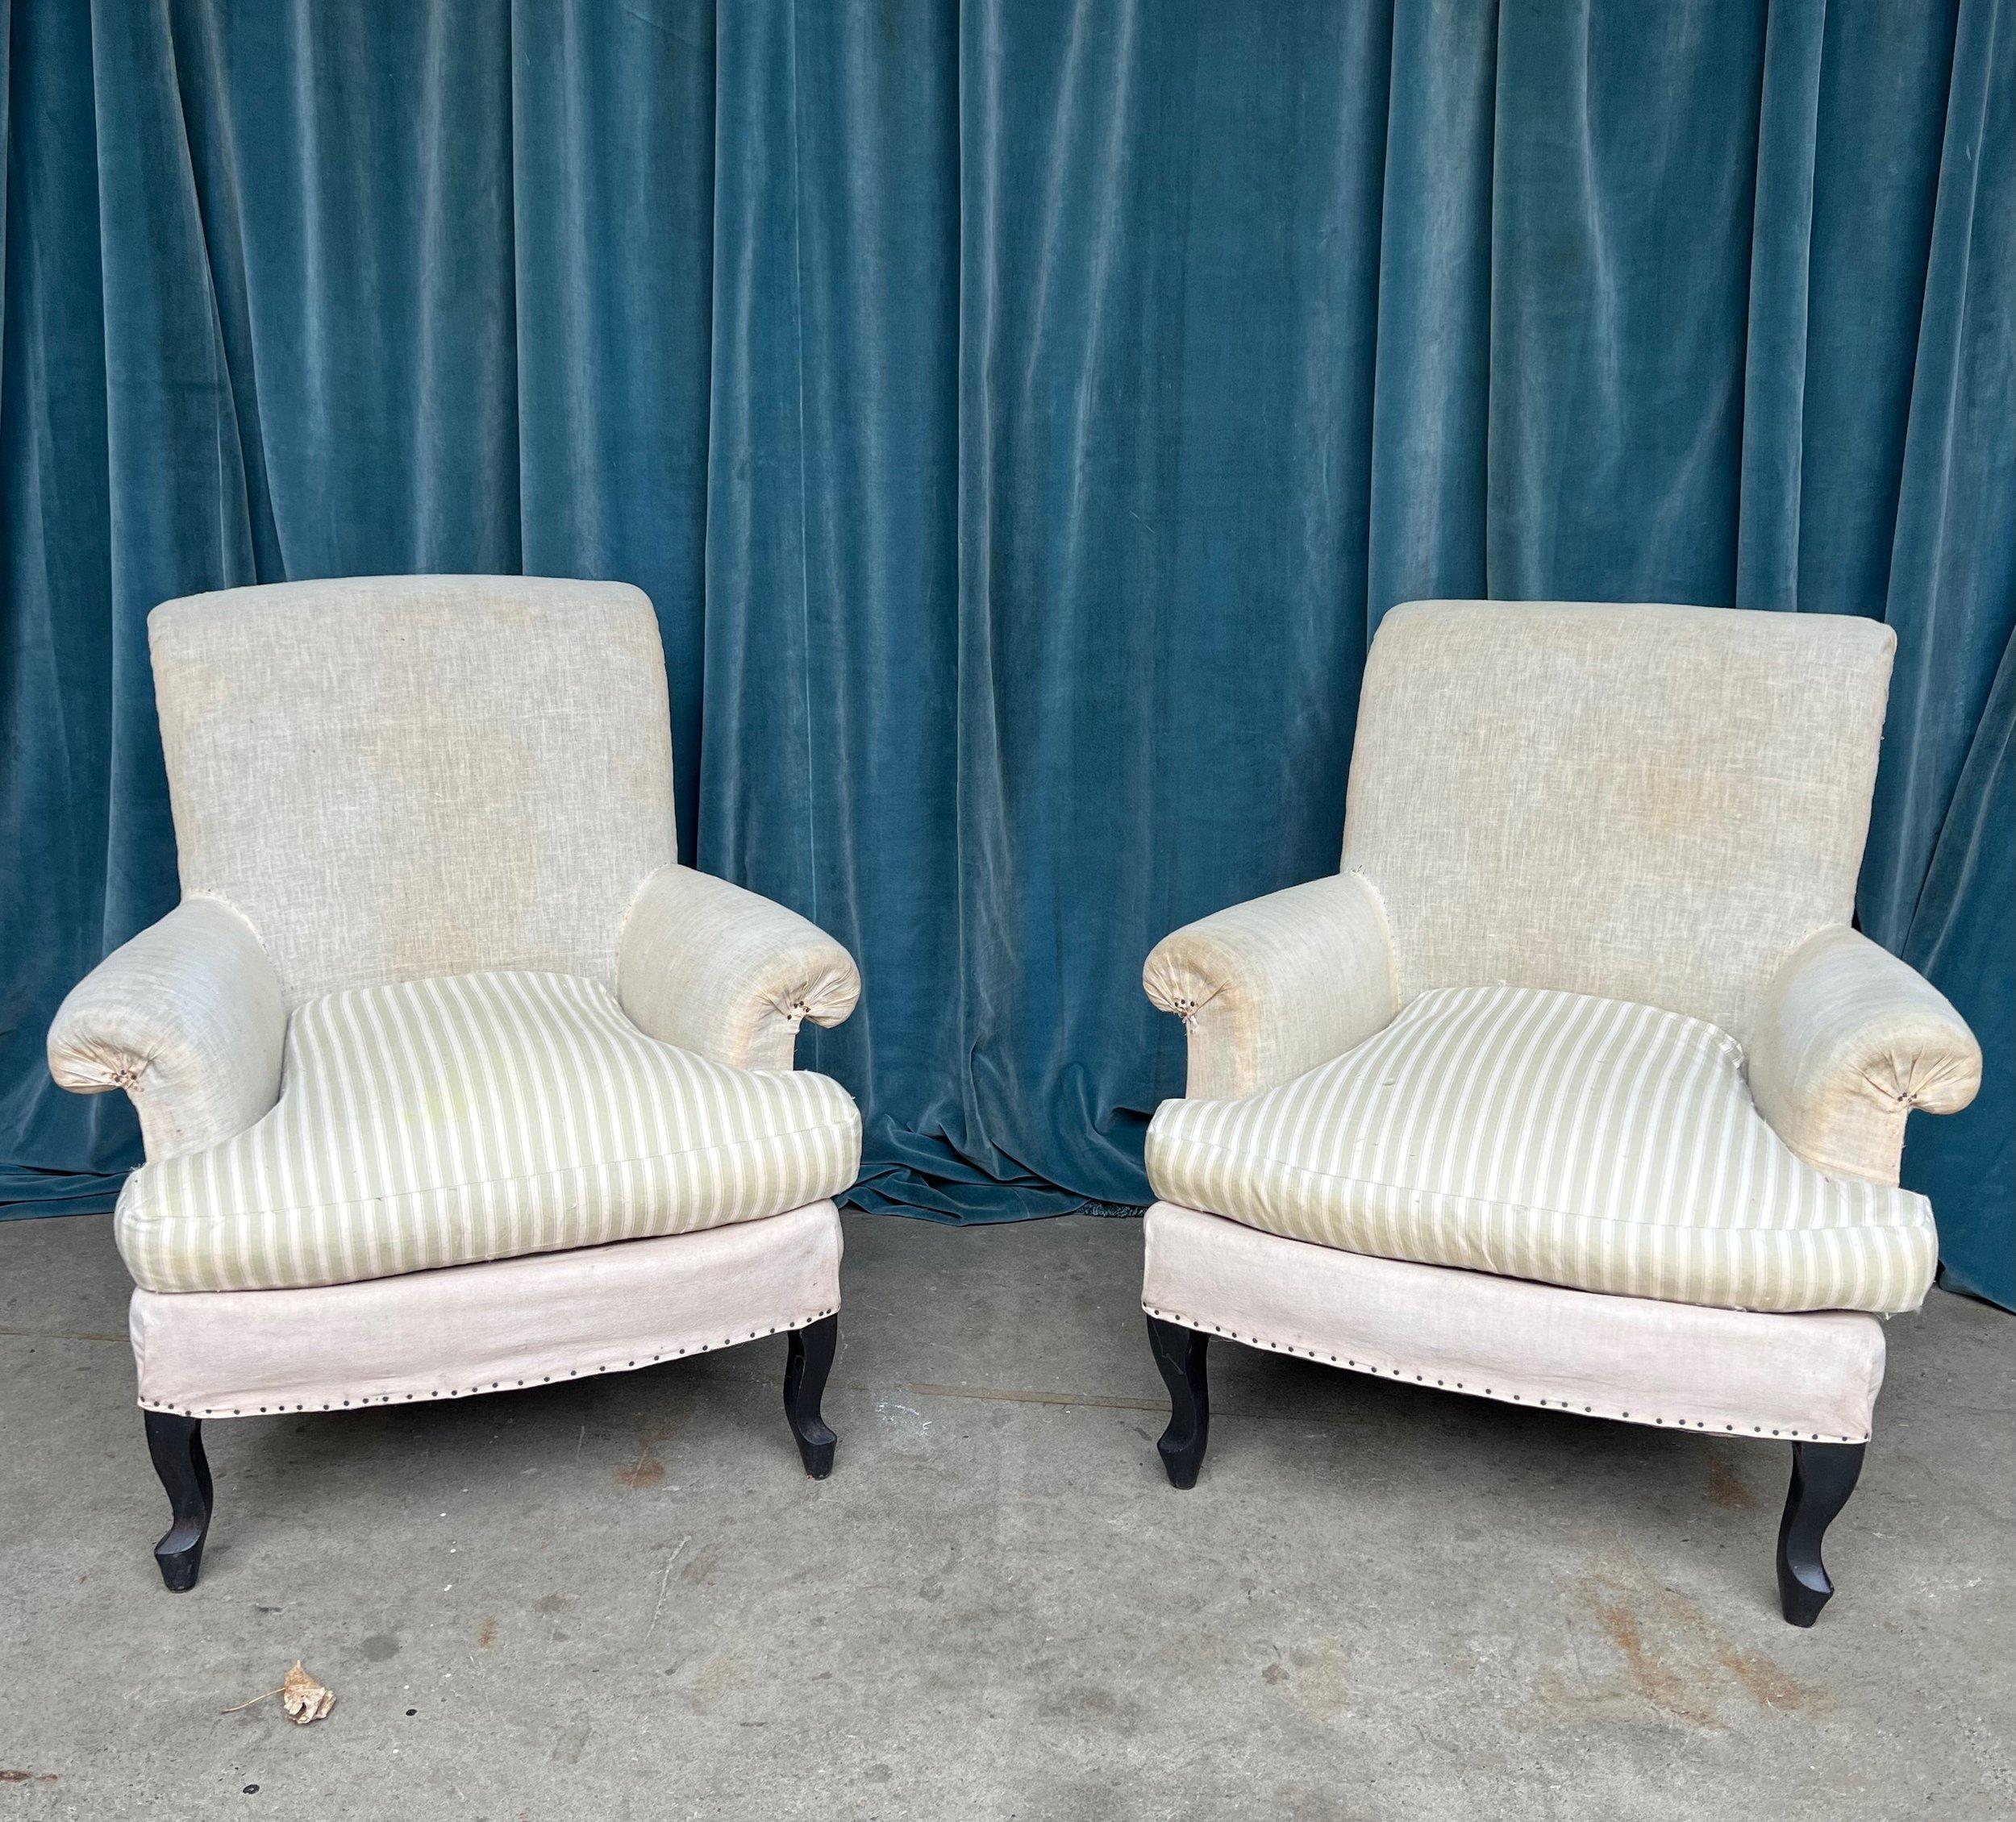 A very comfortable pair of small scale French Napoleon III armchairs from the late 19th century with loose seat cushions. These chairs are a beautiful example of French style with their elegant cabriole legs and scrolled backs. The flowing curves of